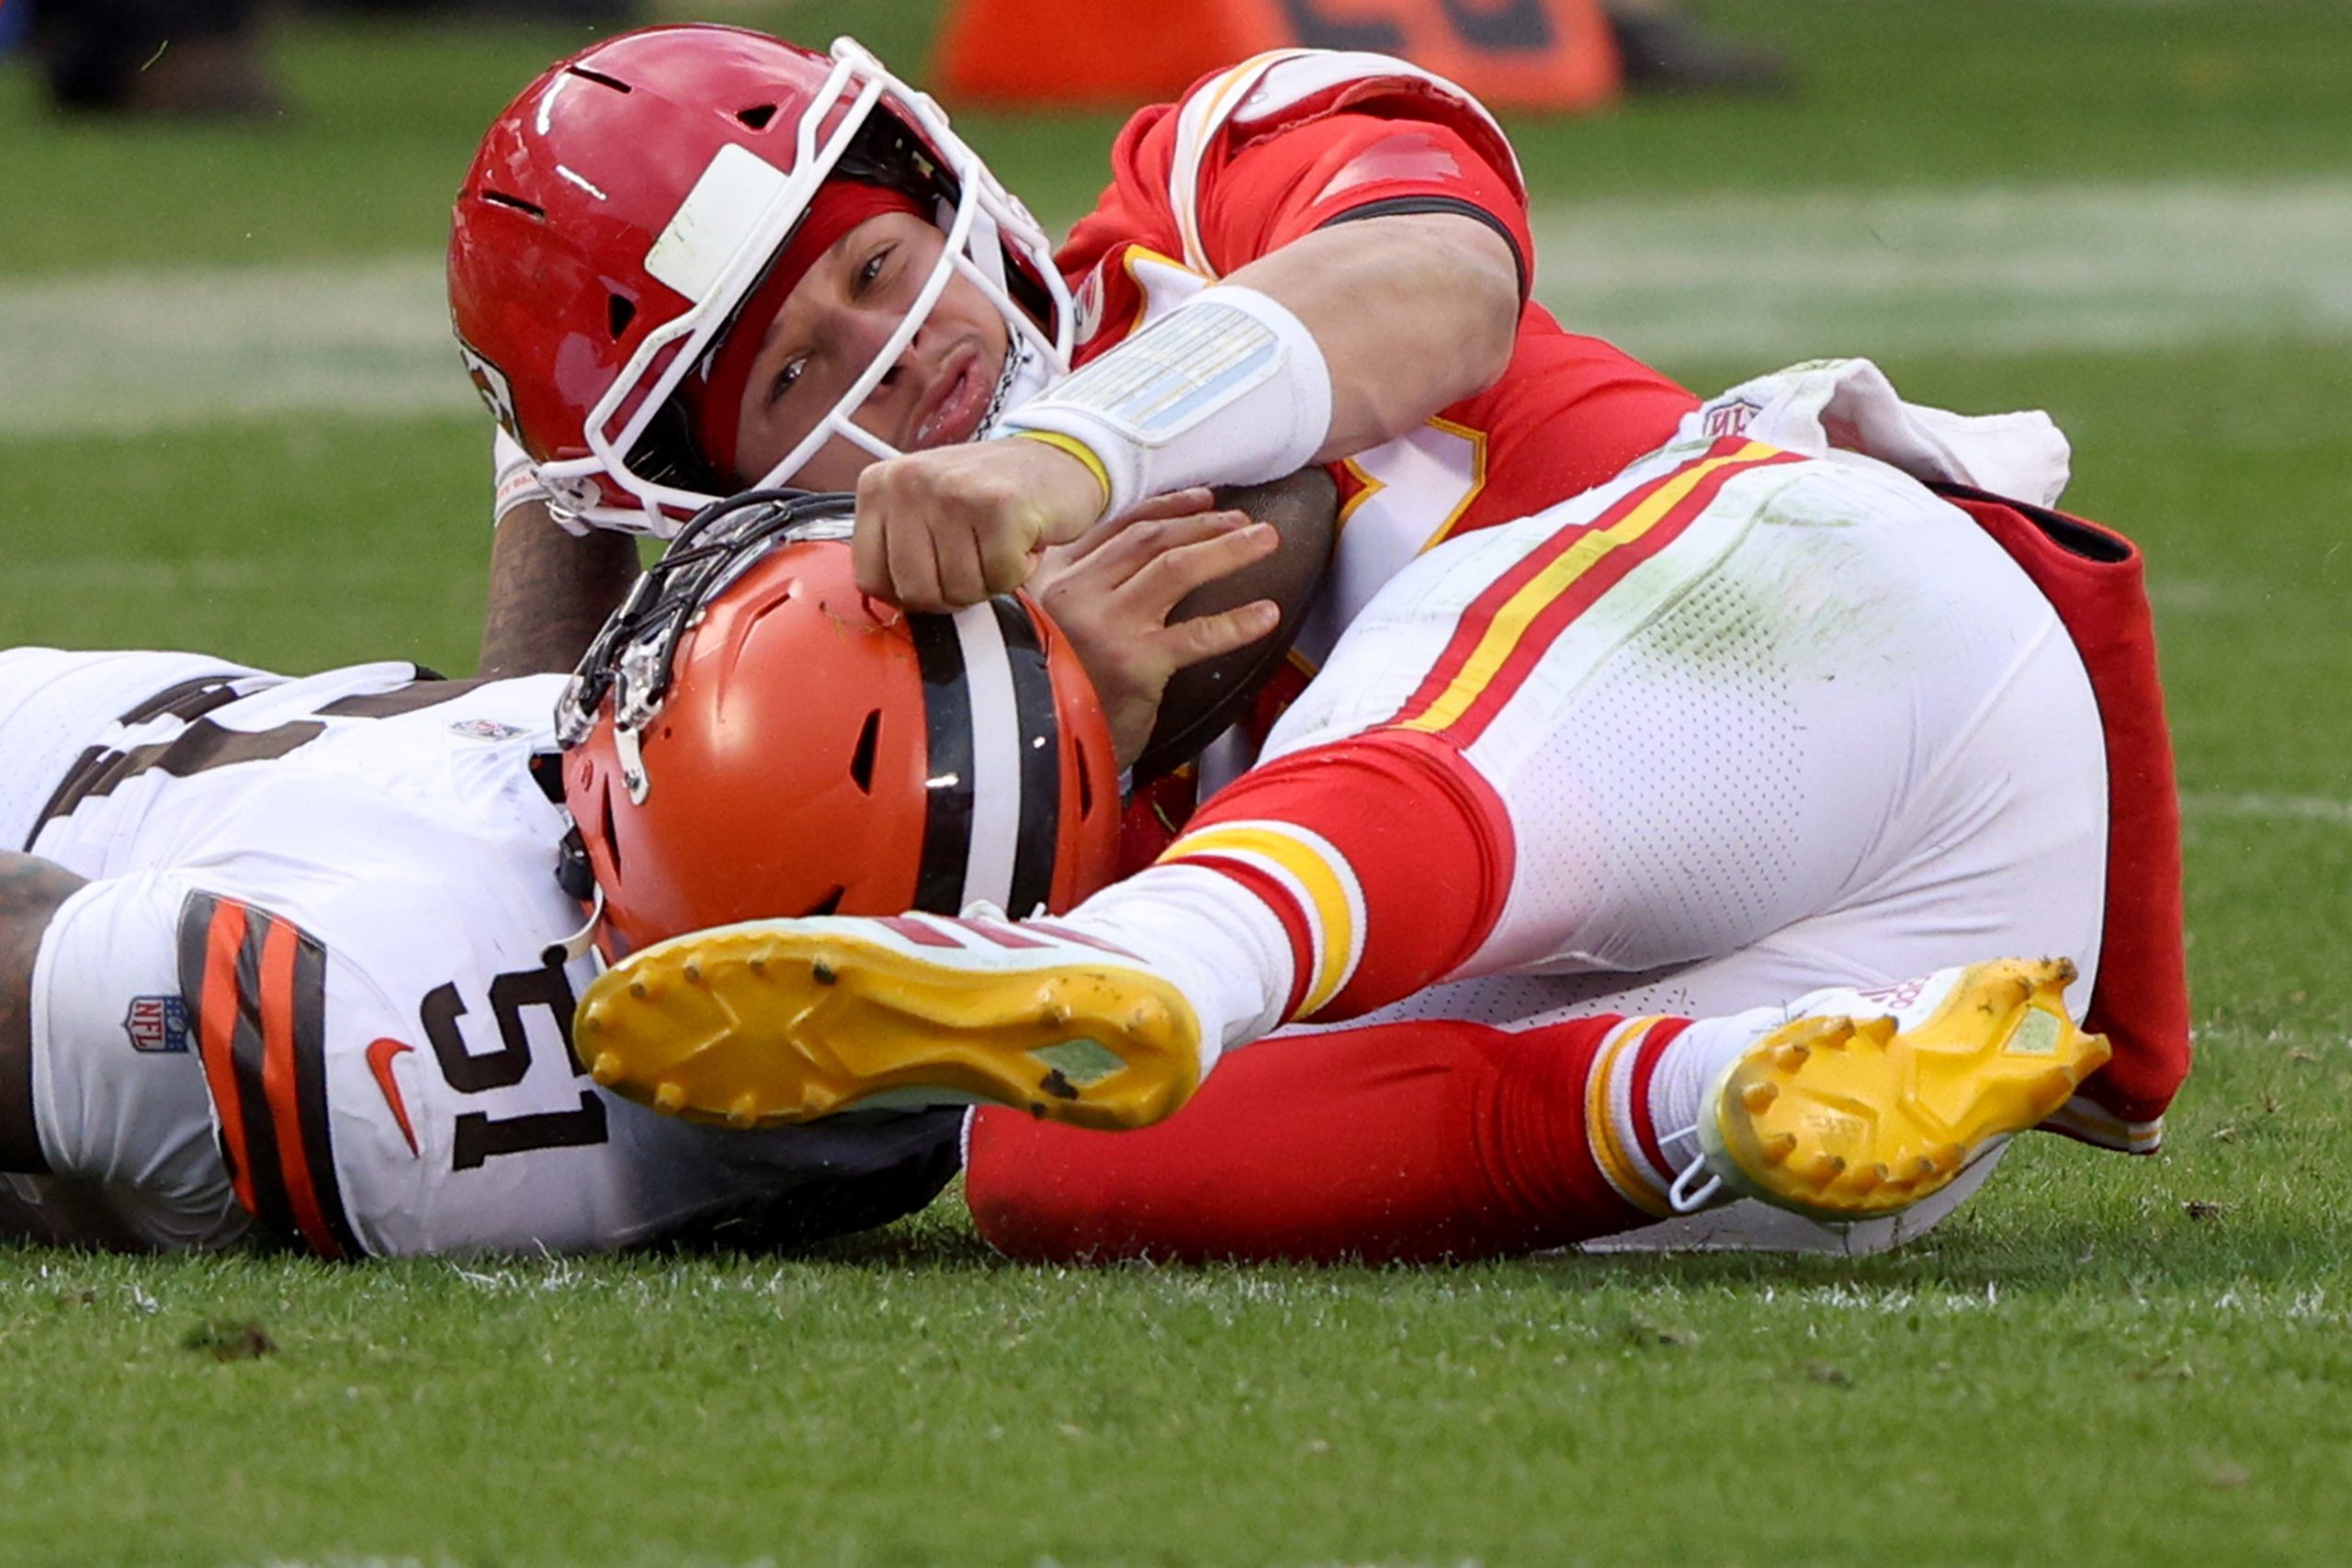 Patrick Mahomes is injured on the play and leaves in the third quarter of the AFC Divisional Playoff game at Arrowhead Stadium on January 17, 2021 in Kansas City, Missouri. 